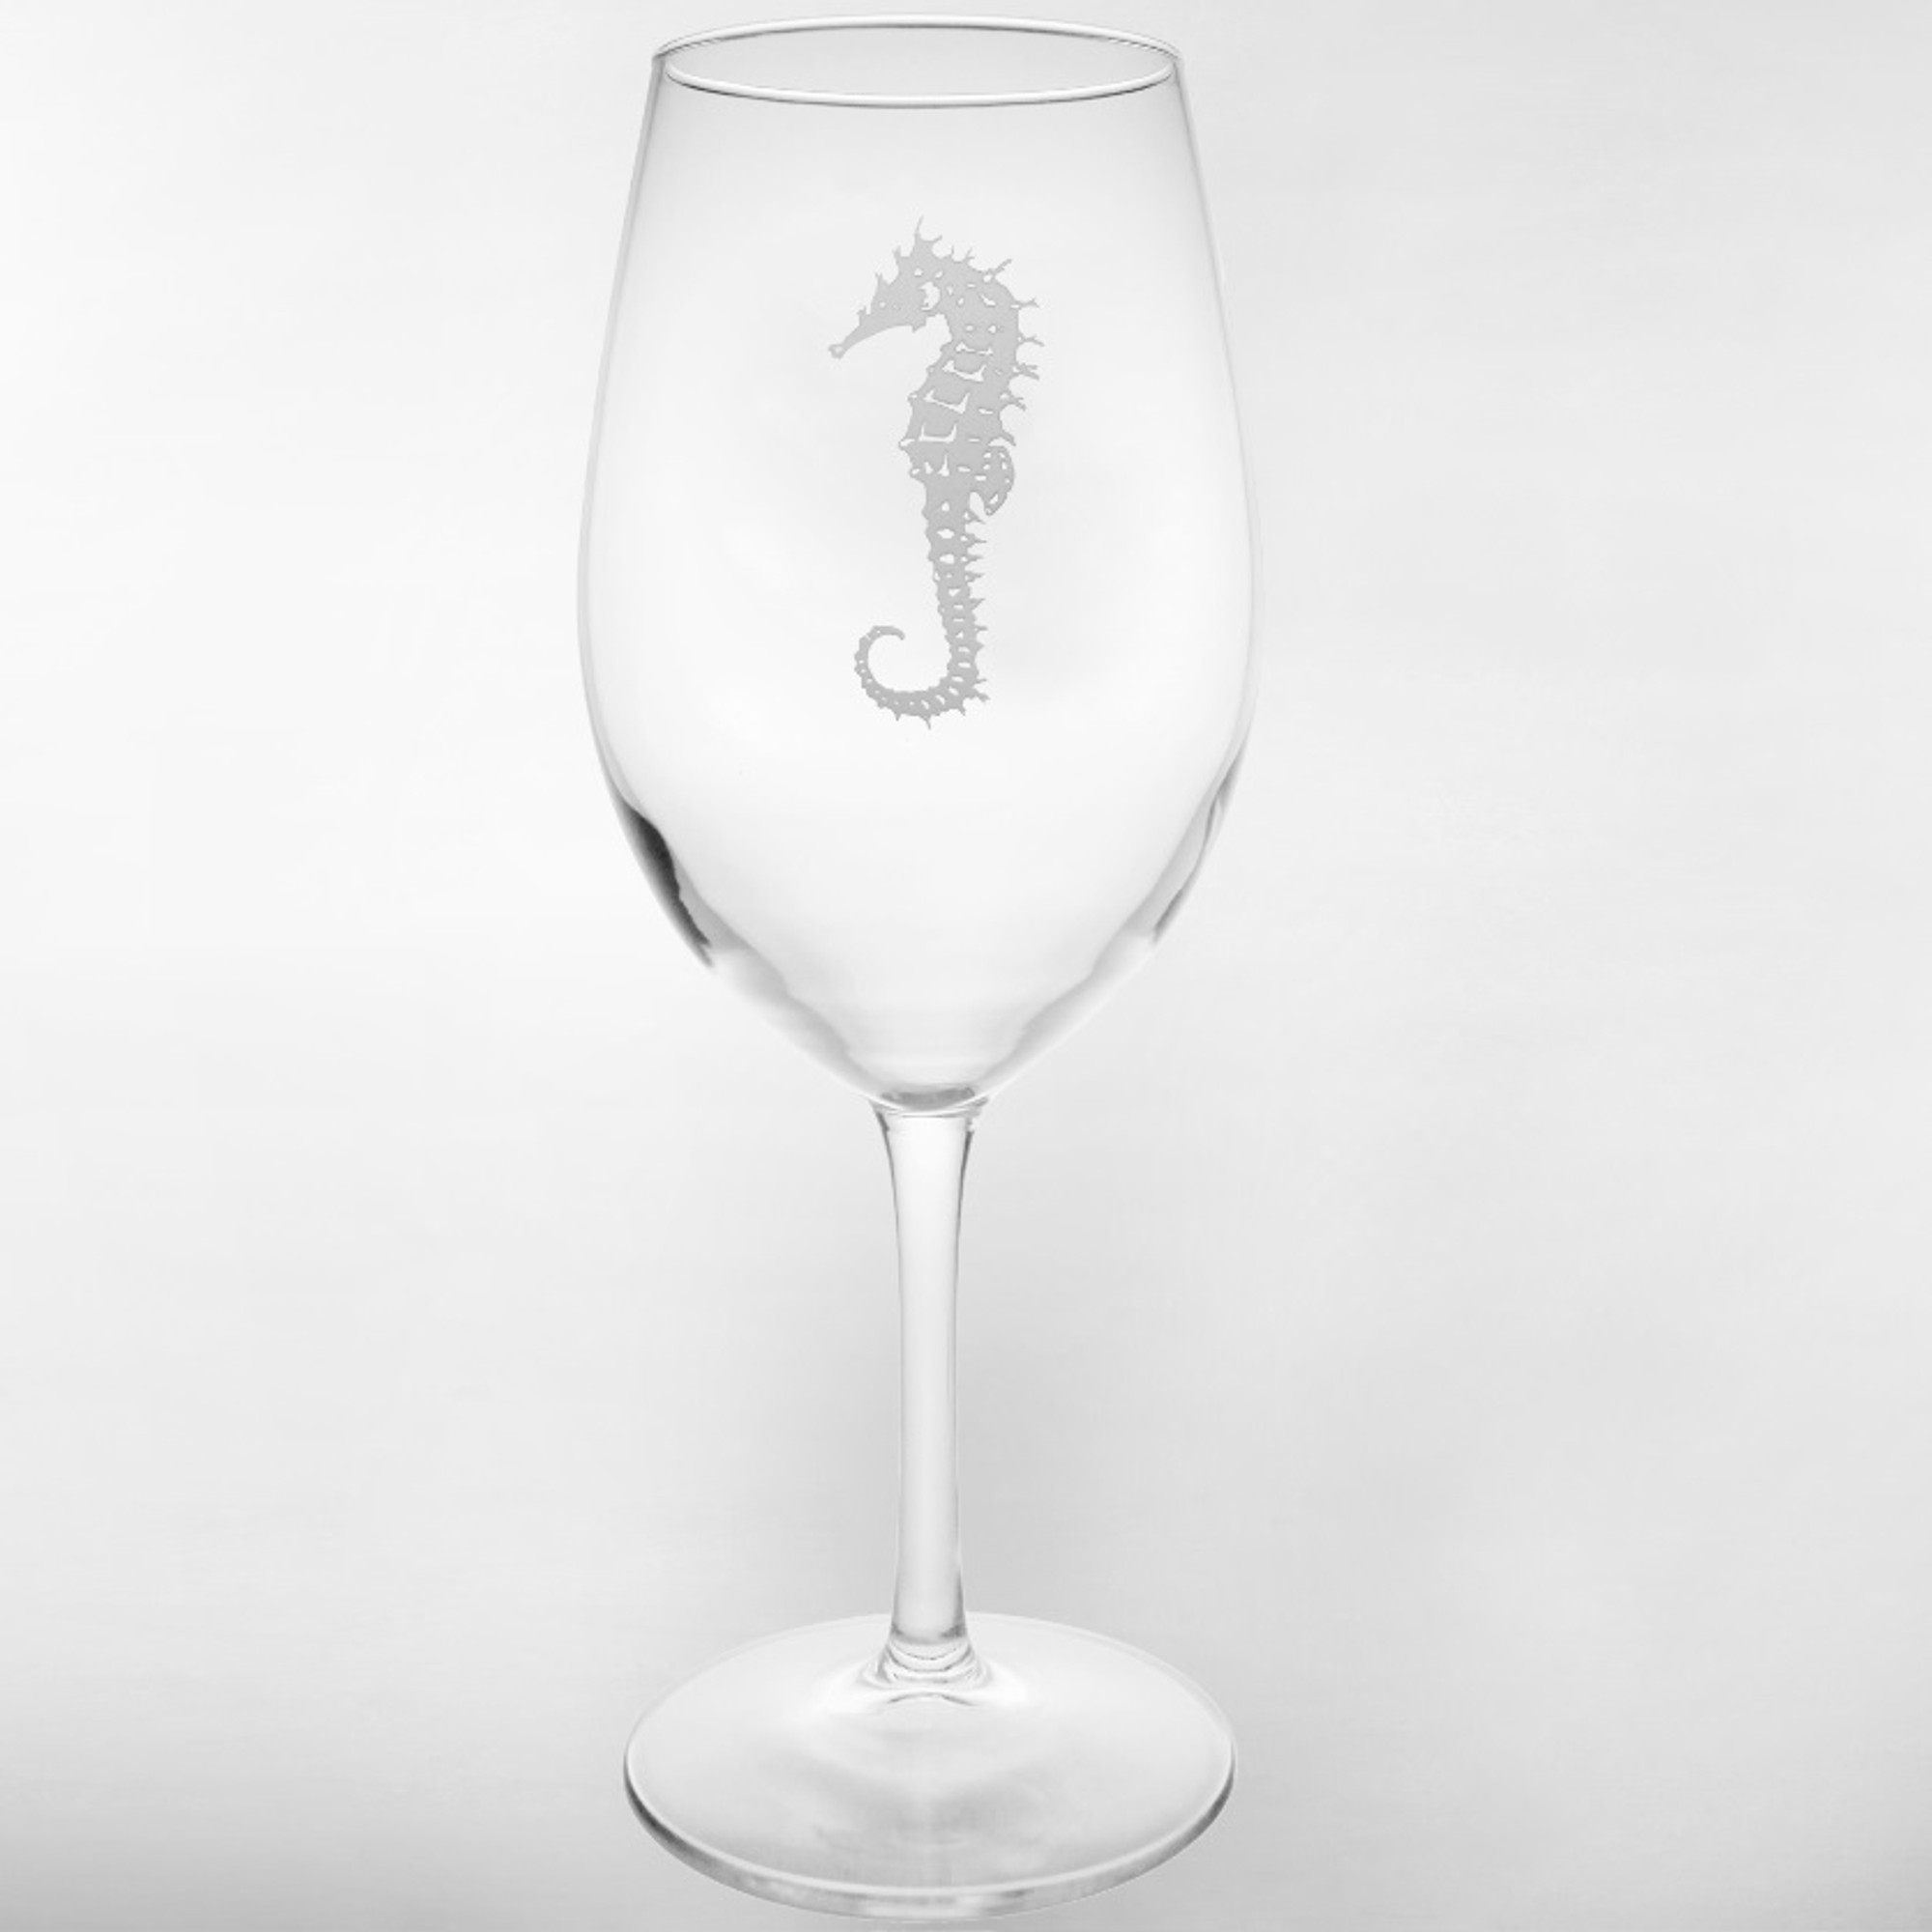 https://cdn11.bigcommerce.com/s-ob7m2s98/images/stencil/2000x2000/products/5874/23189/seahorse_wine__11294.1574441725.jpg?c=2